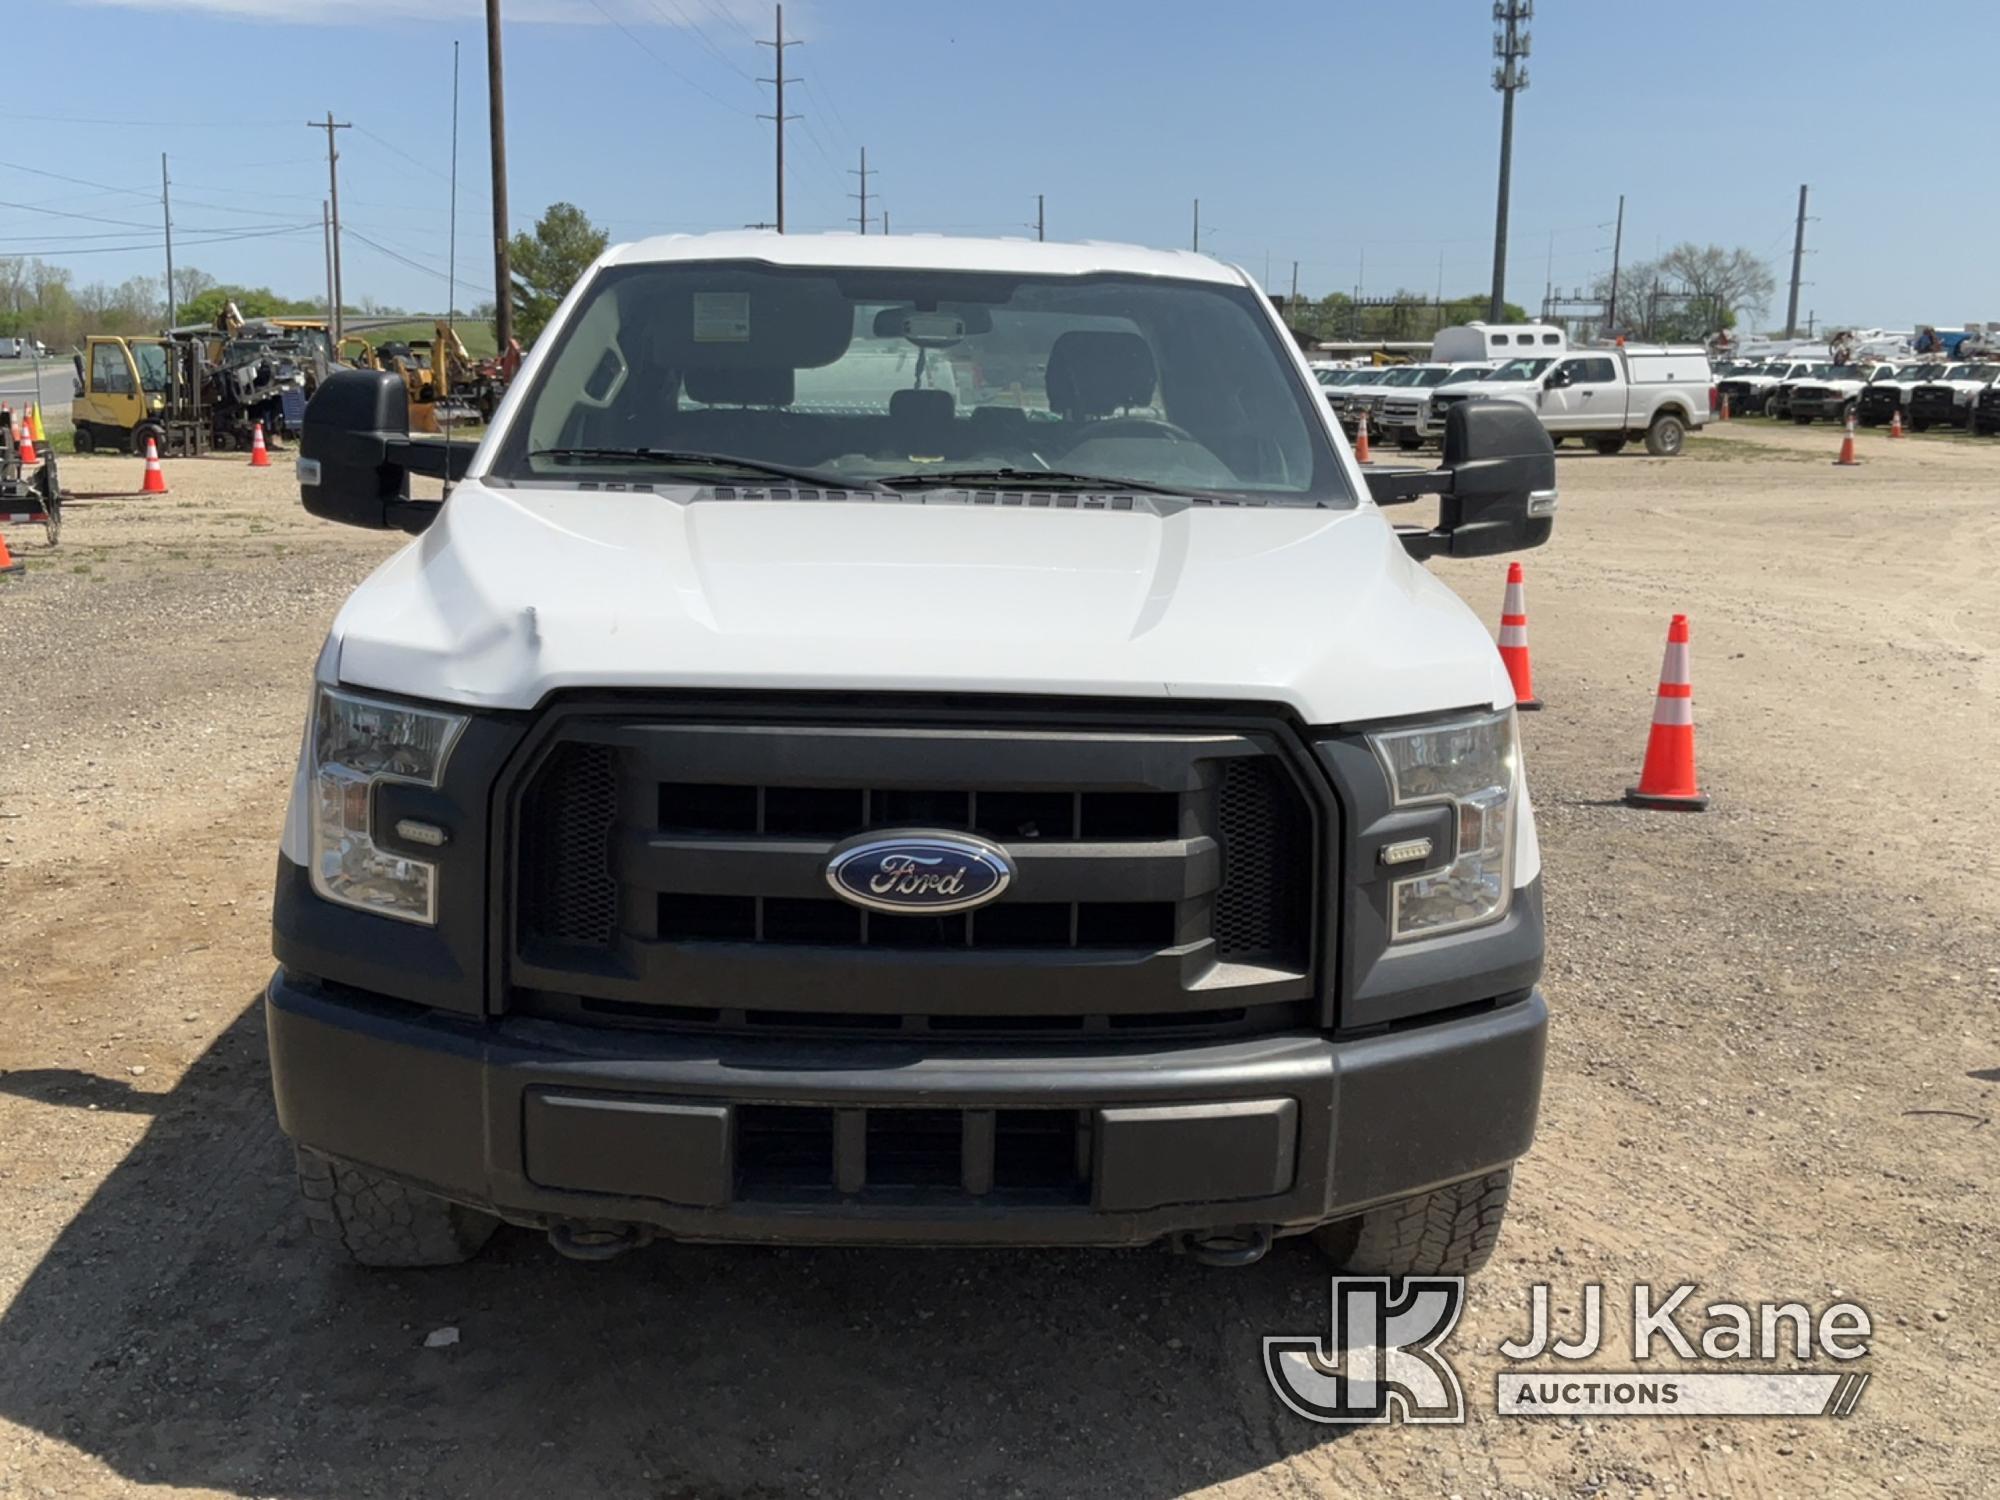 (Charlotte, MI) 2016 Ford F150 Extended-Cab Pickup Truck Runs But Stalls When Driving, Moves, Servic